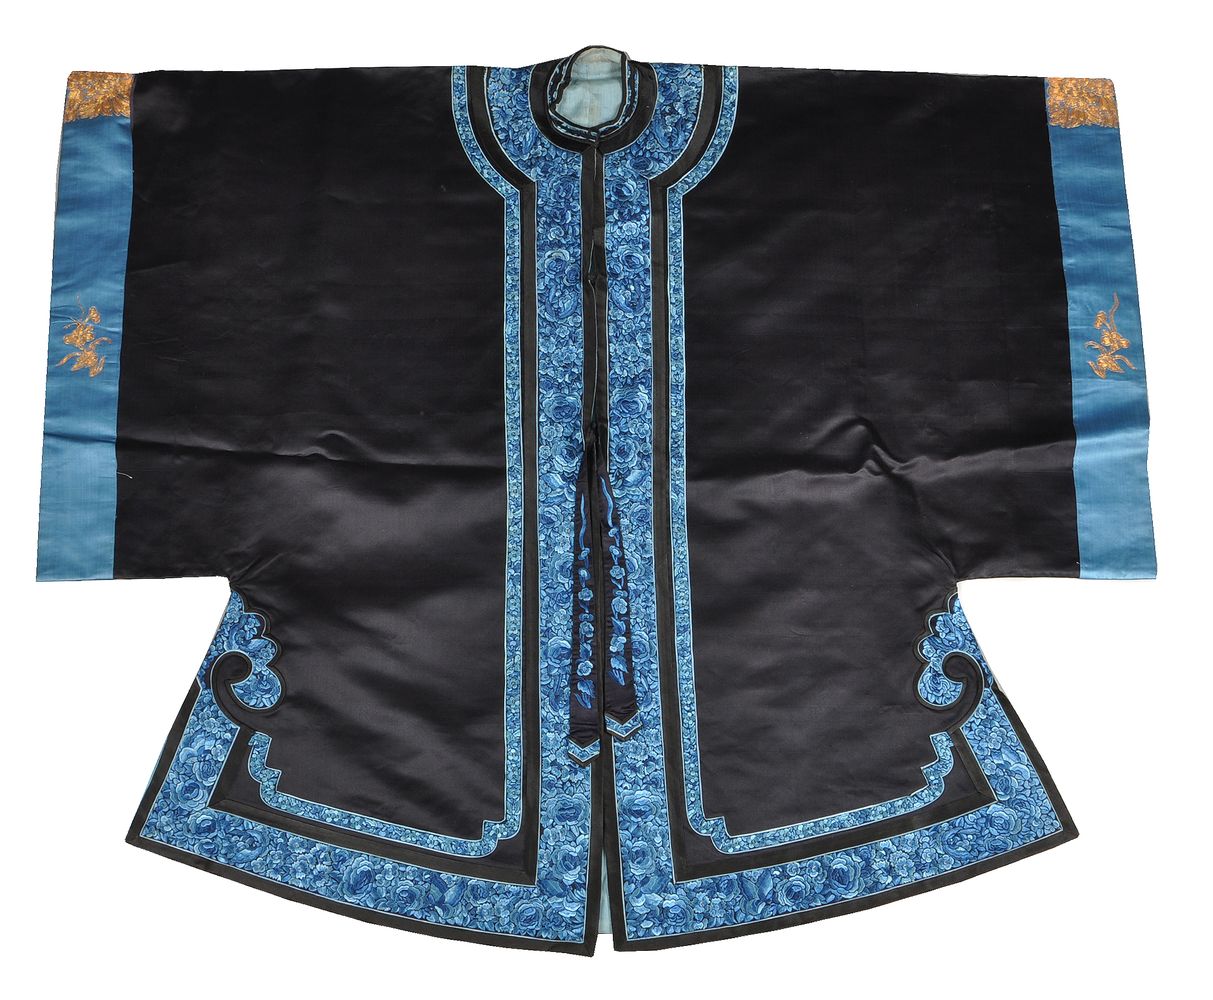 A fine midnight blue satin silk lady's front opening robe